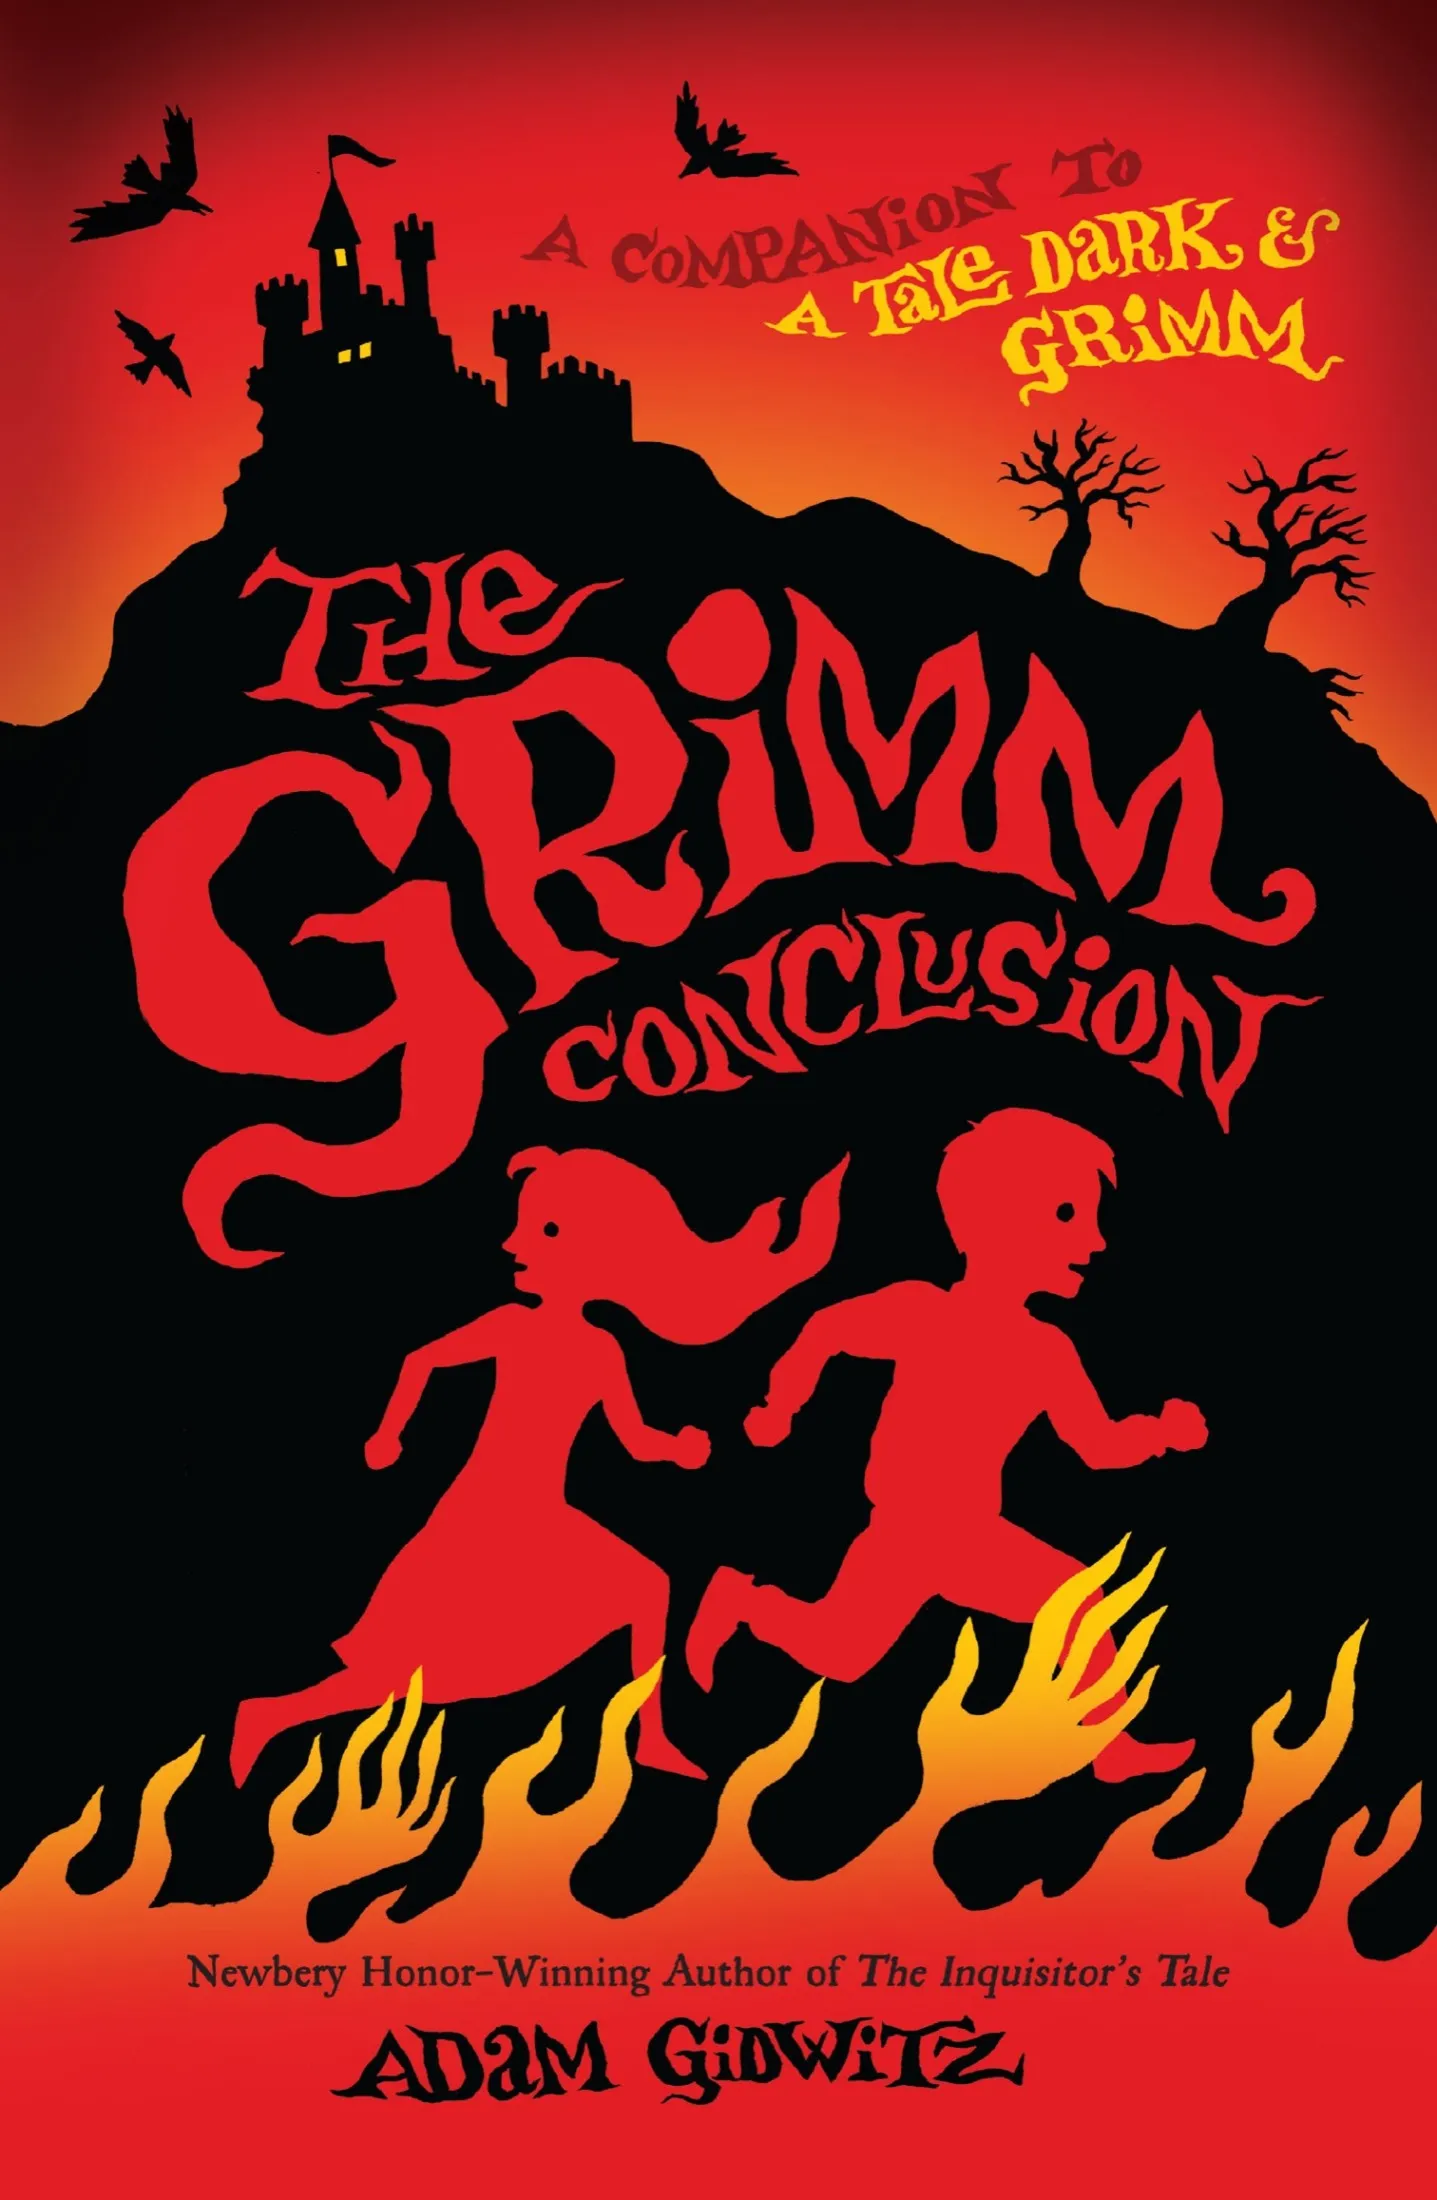 The Grimm Conclusion (A Tale Dark & Grimm #3)